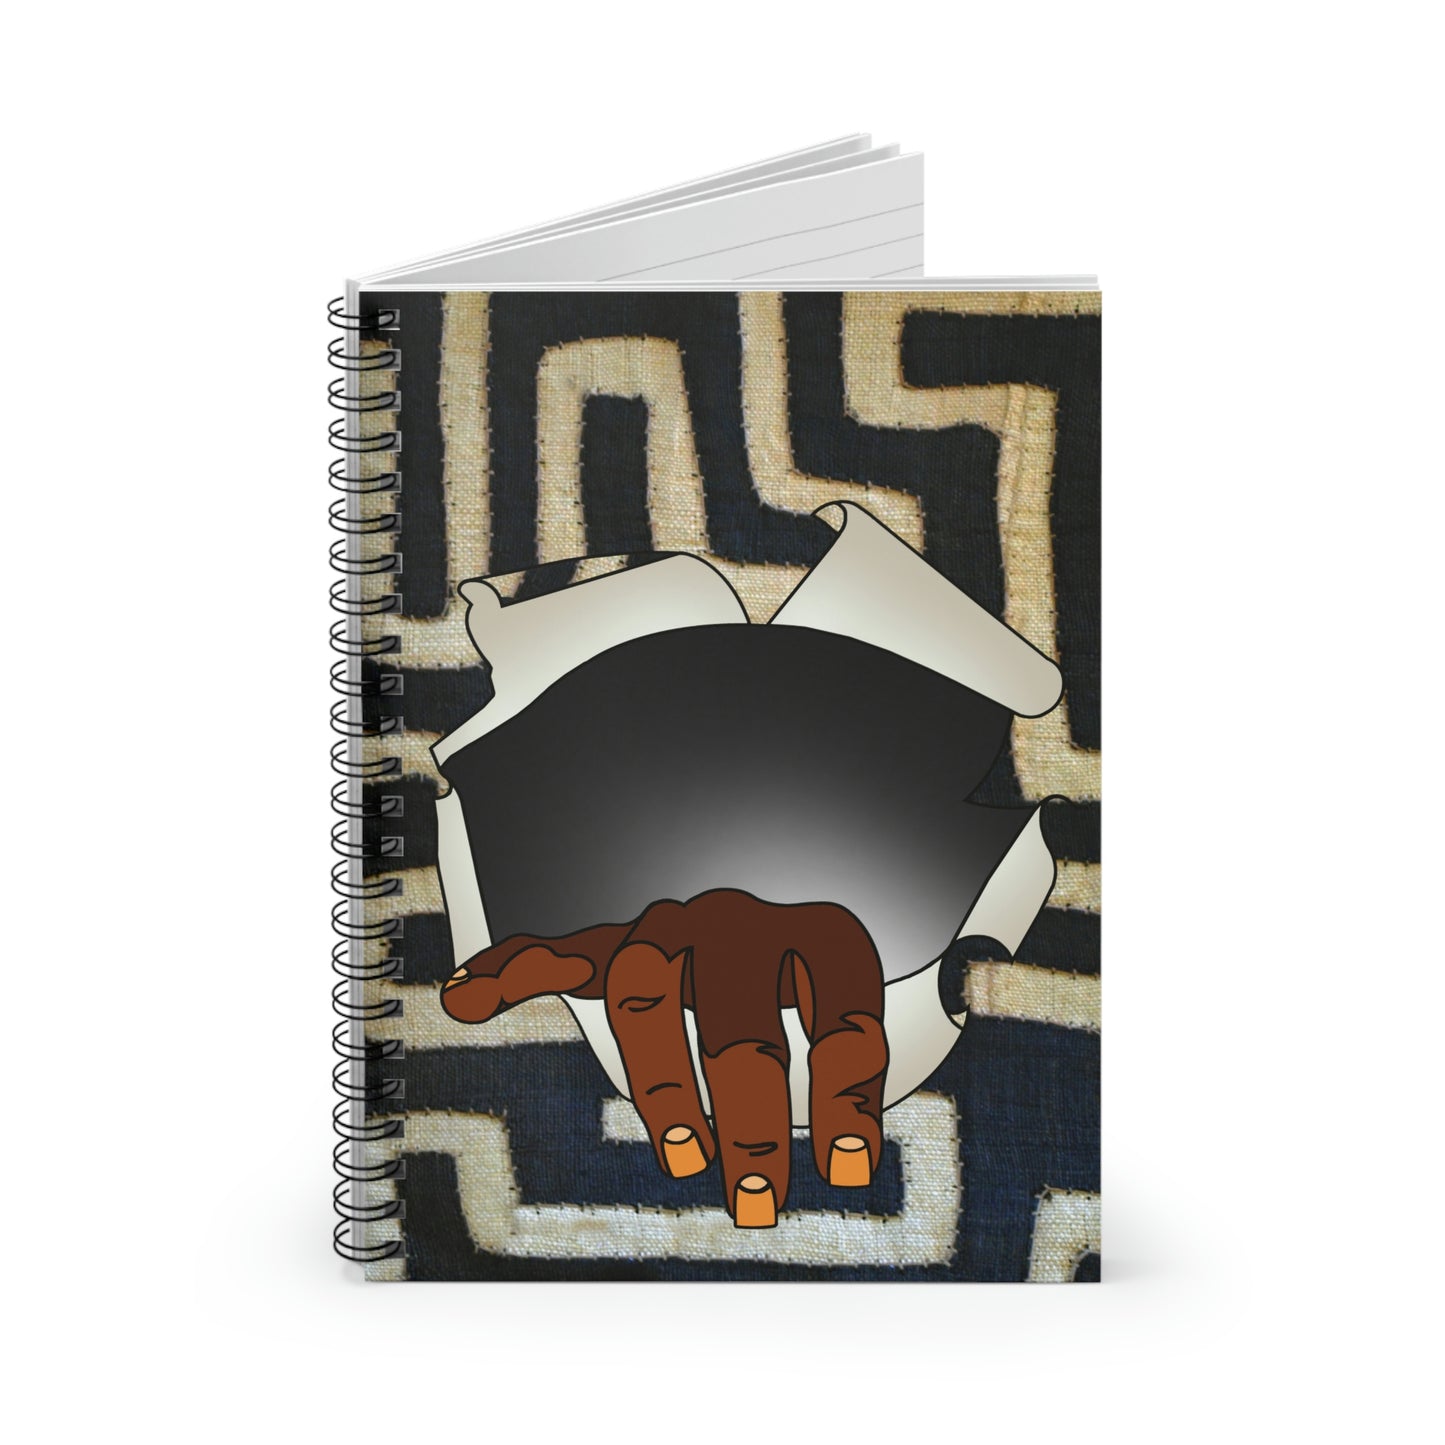 A Show of Hands! Spiral Notebook - Ruled Line